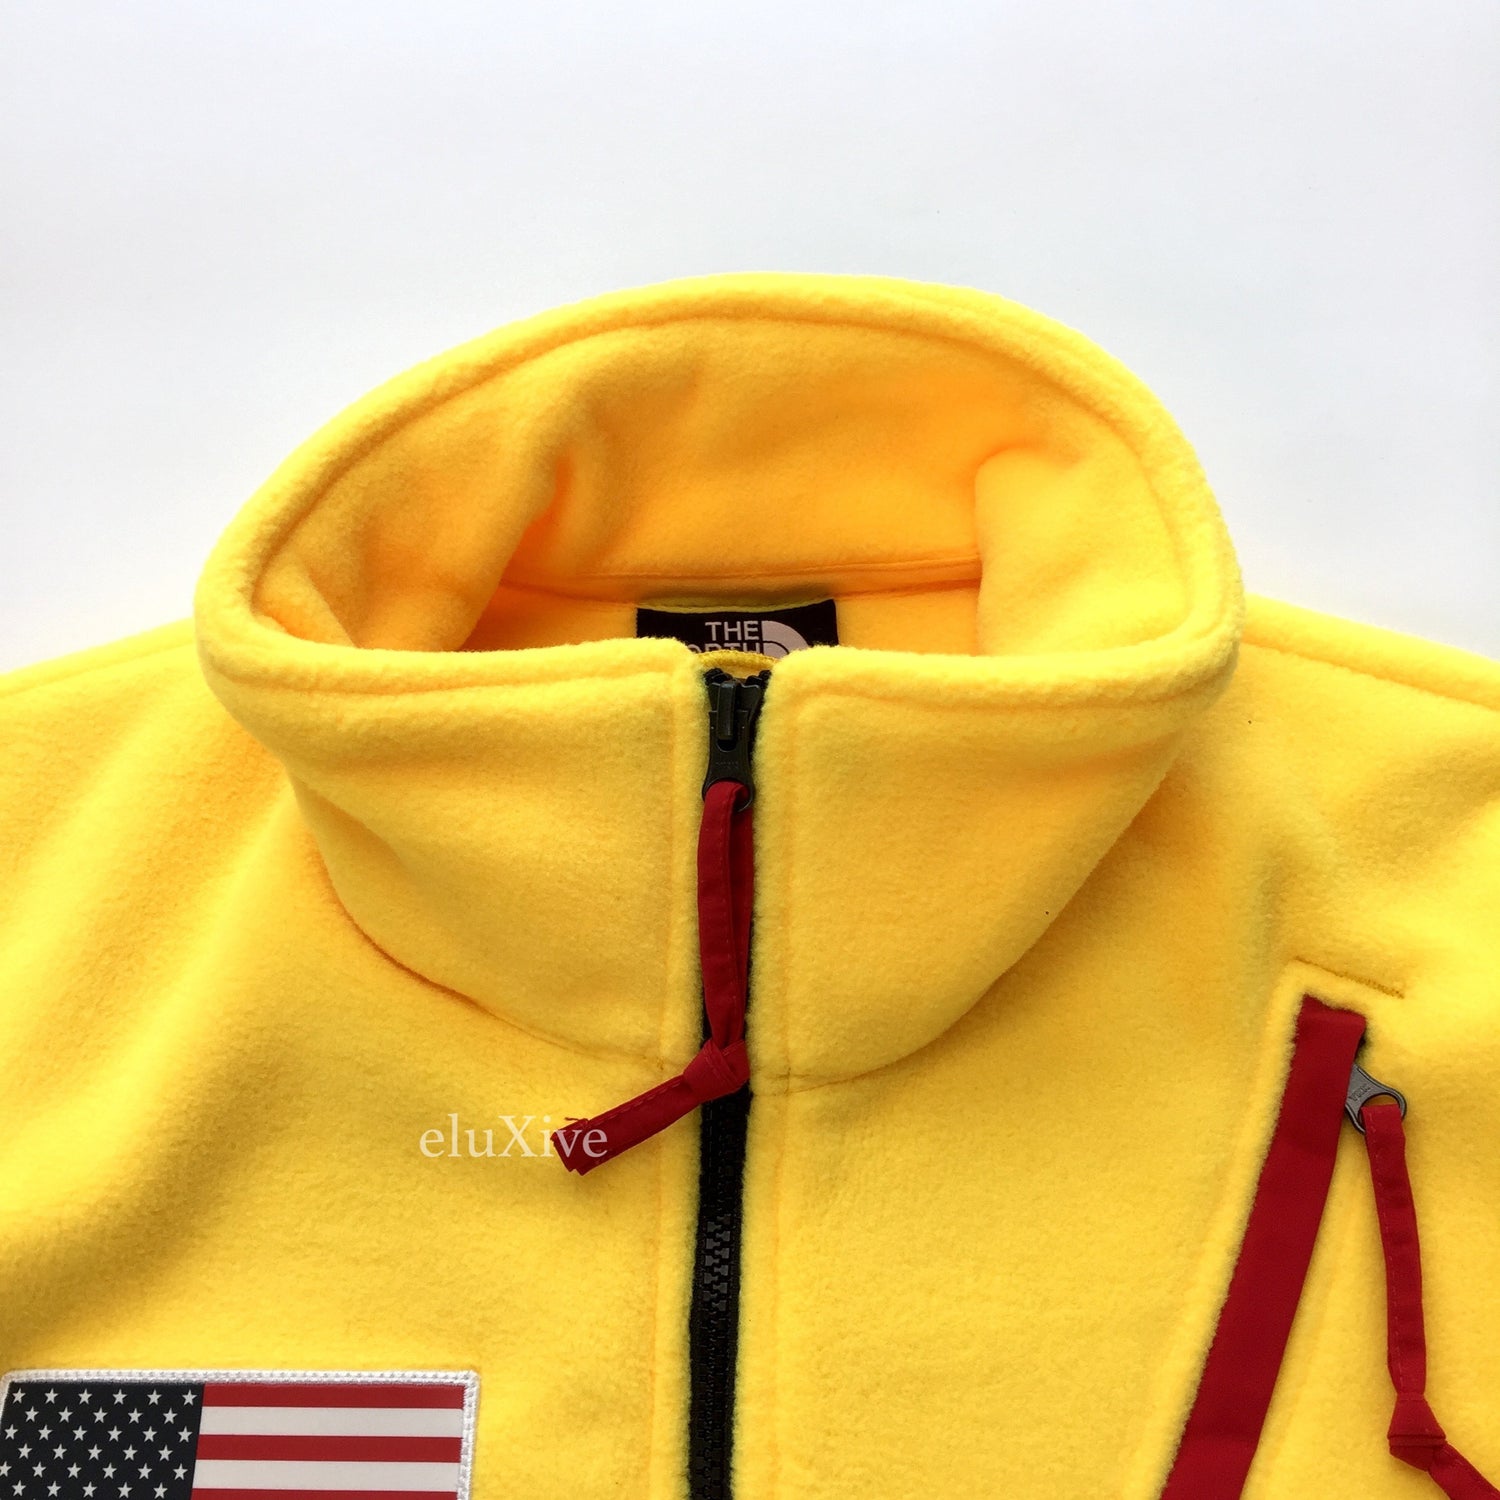 Supreme x The North Face - Yellow Trans Antarctica Expedition ...